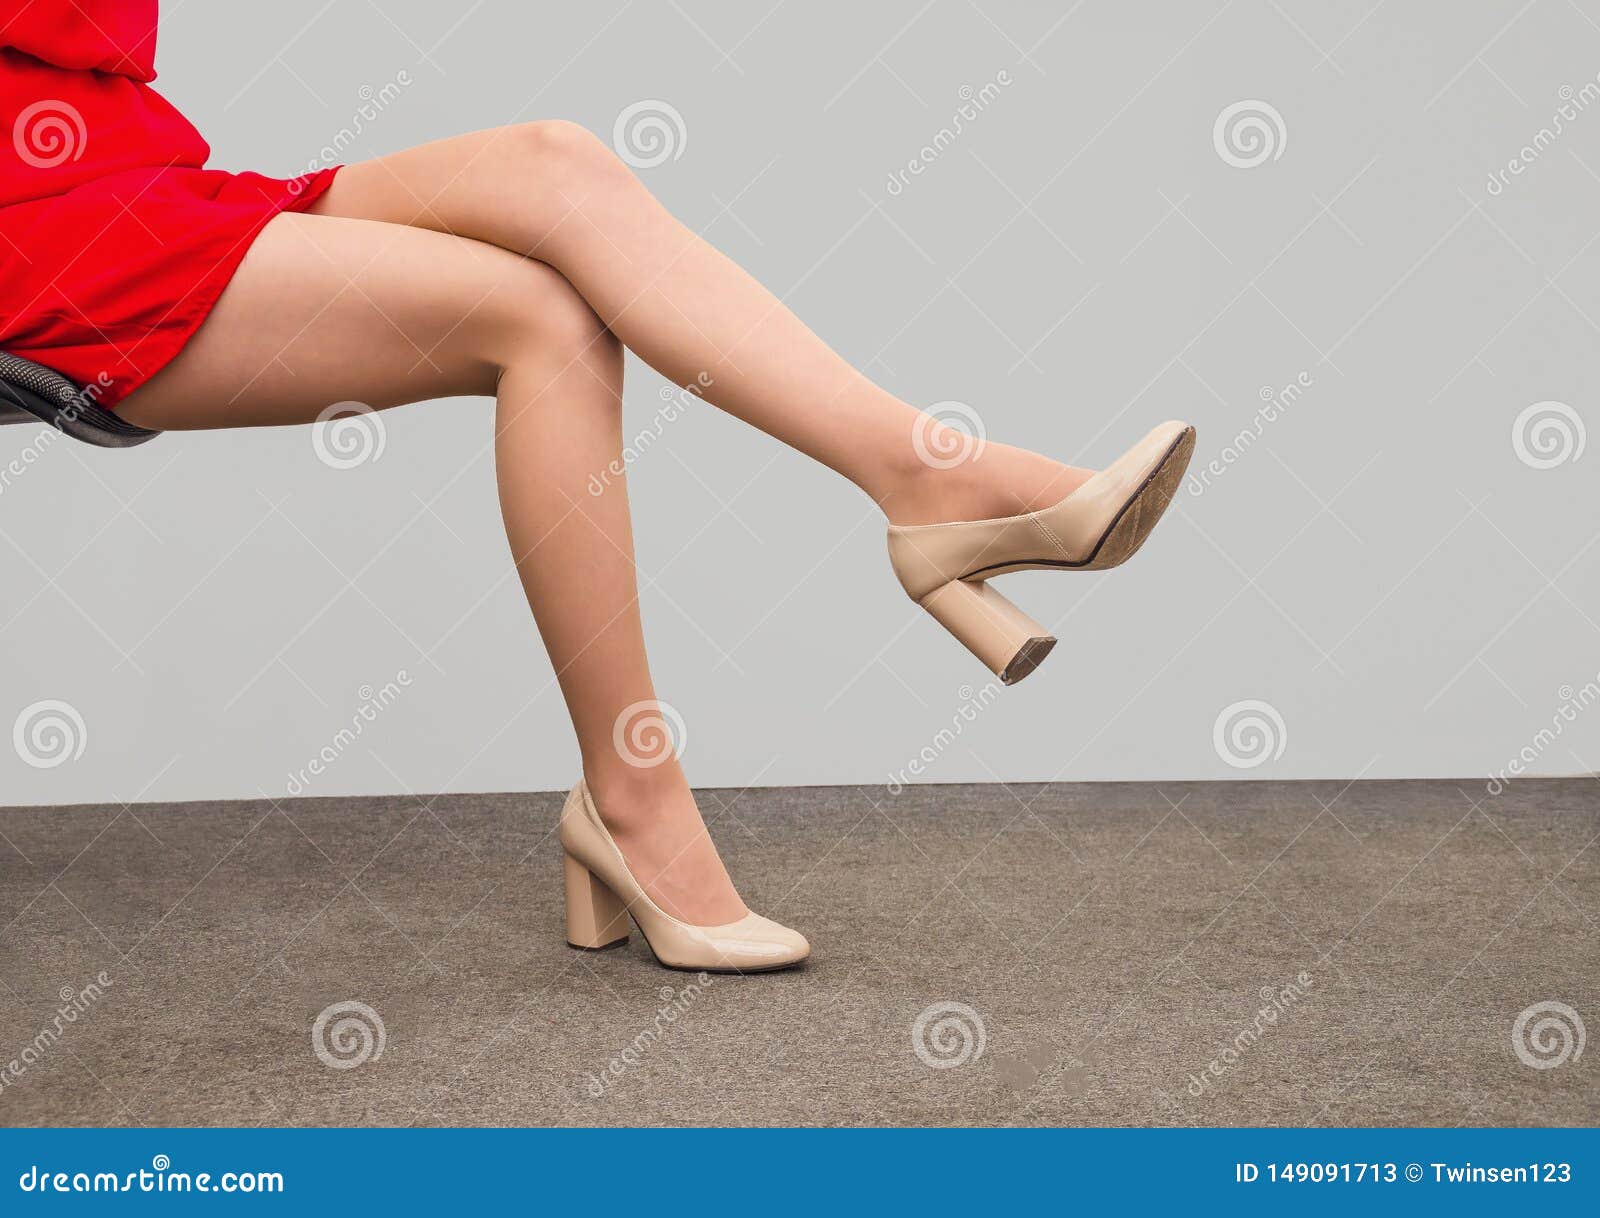 slender legs of a woman sitting on a chair. sexuality, seduction, women`s health